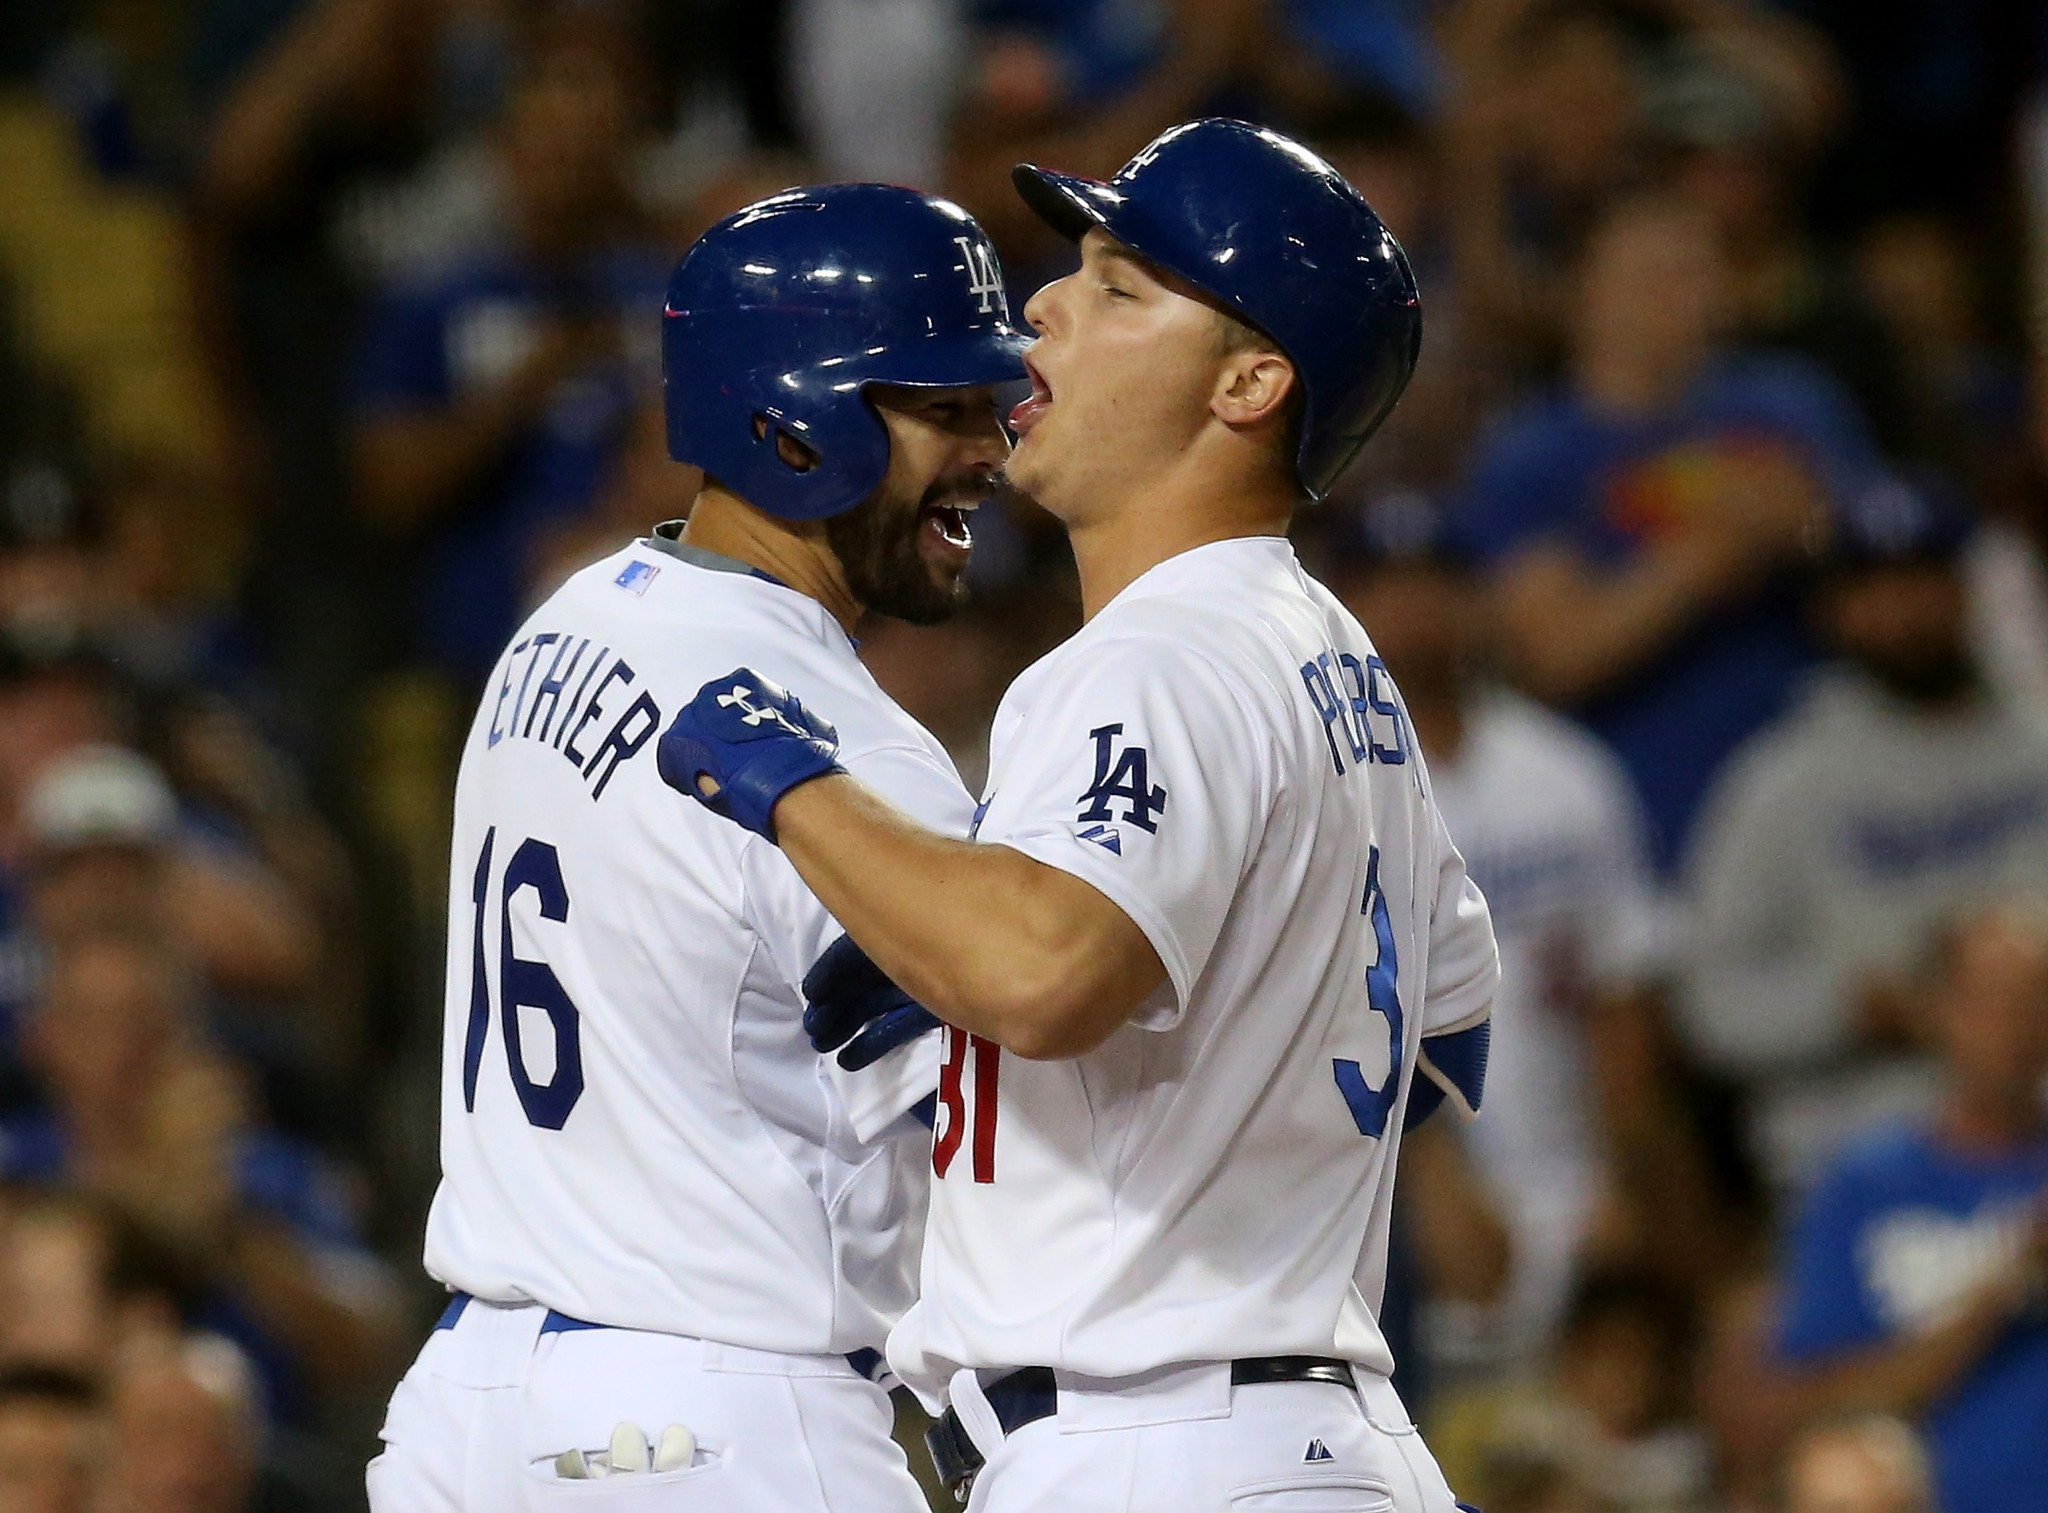 Dodgers' youthful start continues in 8-0 rout of Diamondbacks - LA Times